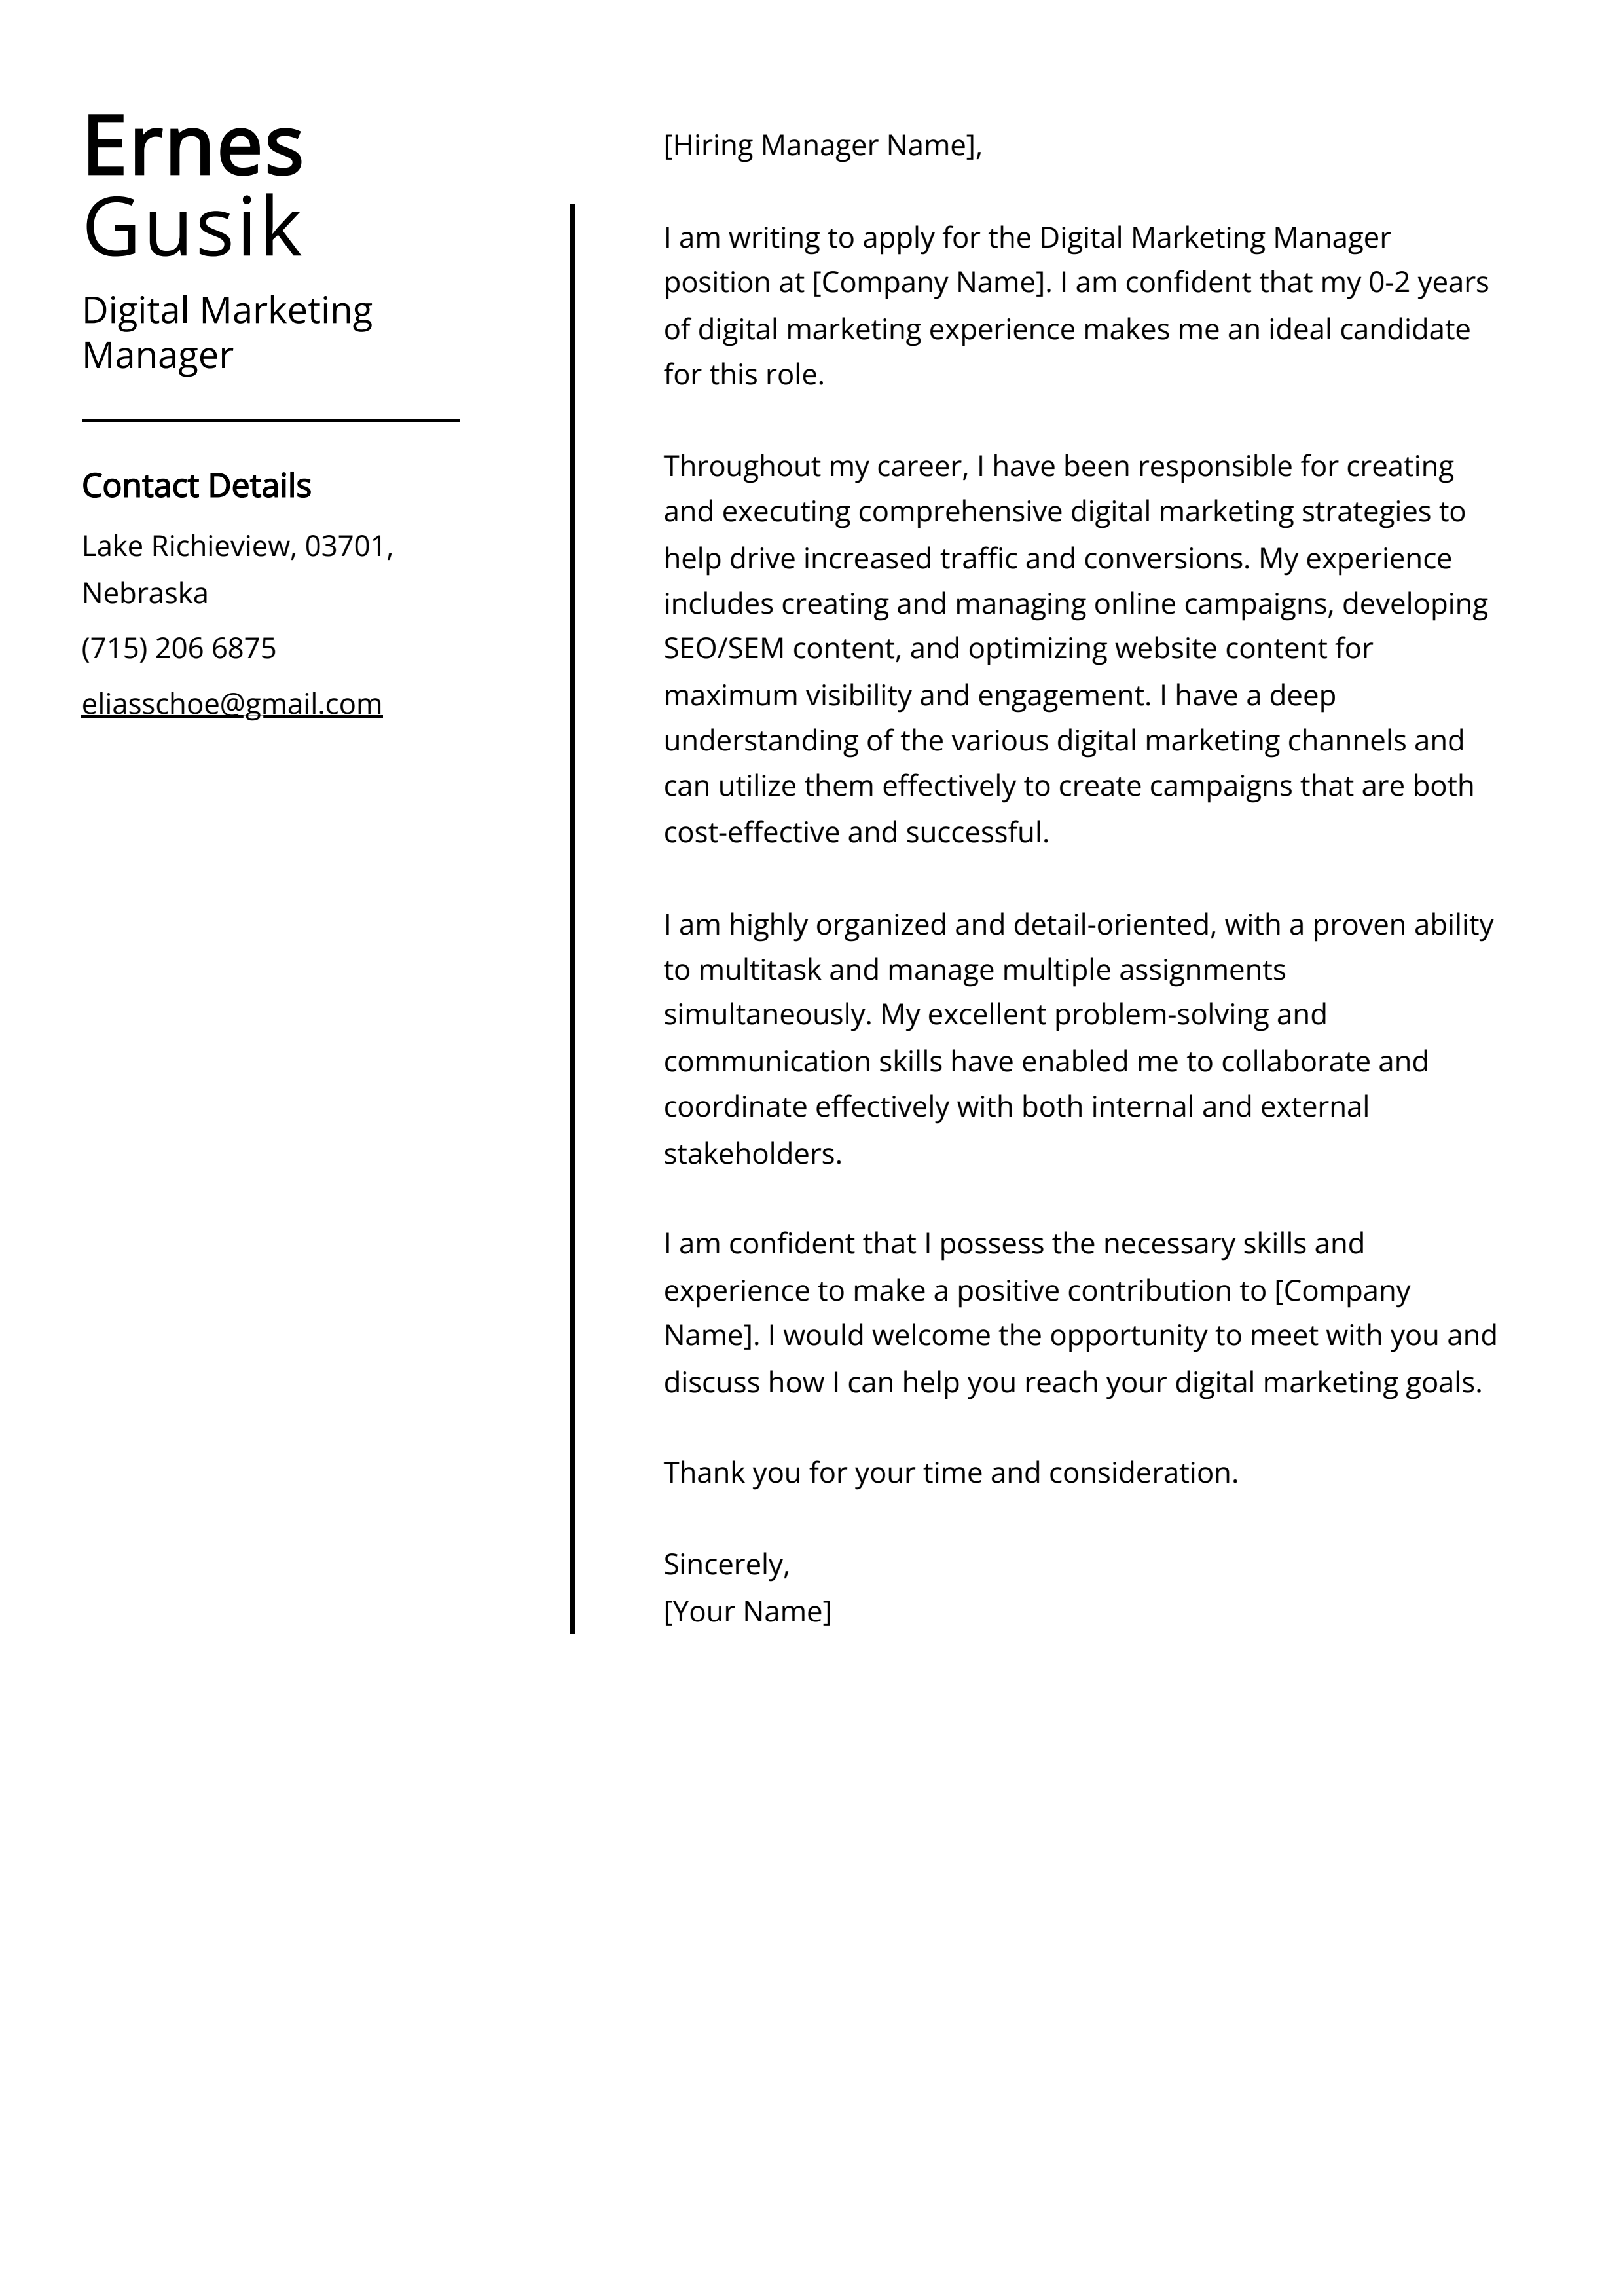 Digital Marketing Manager Cover Letter Example